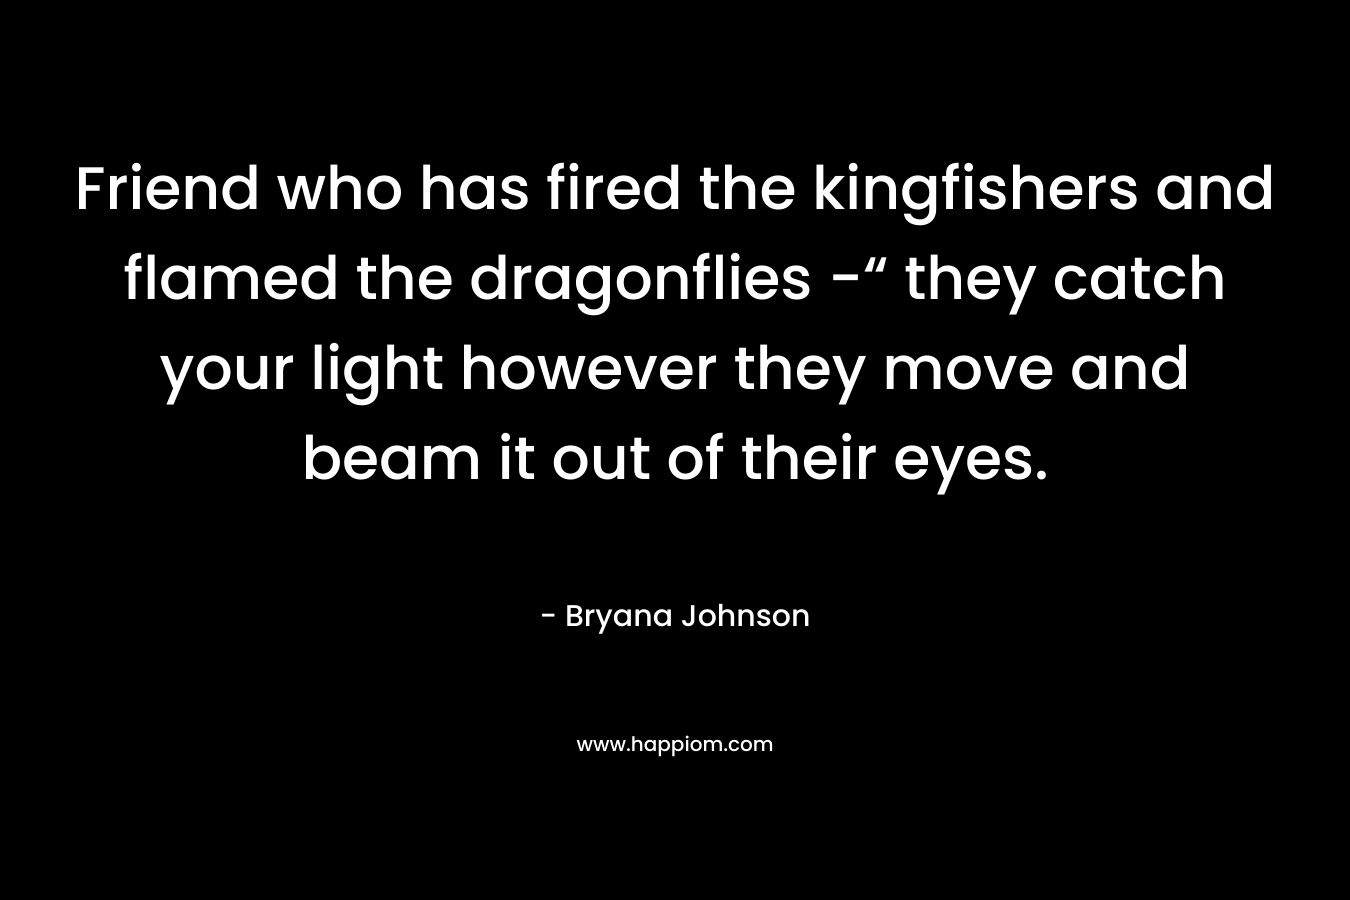 Friend who has fired the kingfishers and flamed the dragonflies -“ they catch your light however they move and beam it out of their eyes. – Bryana Johnson